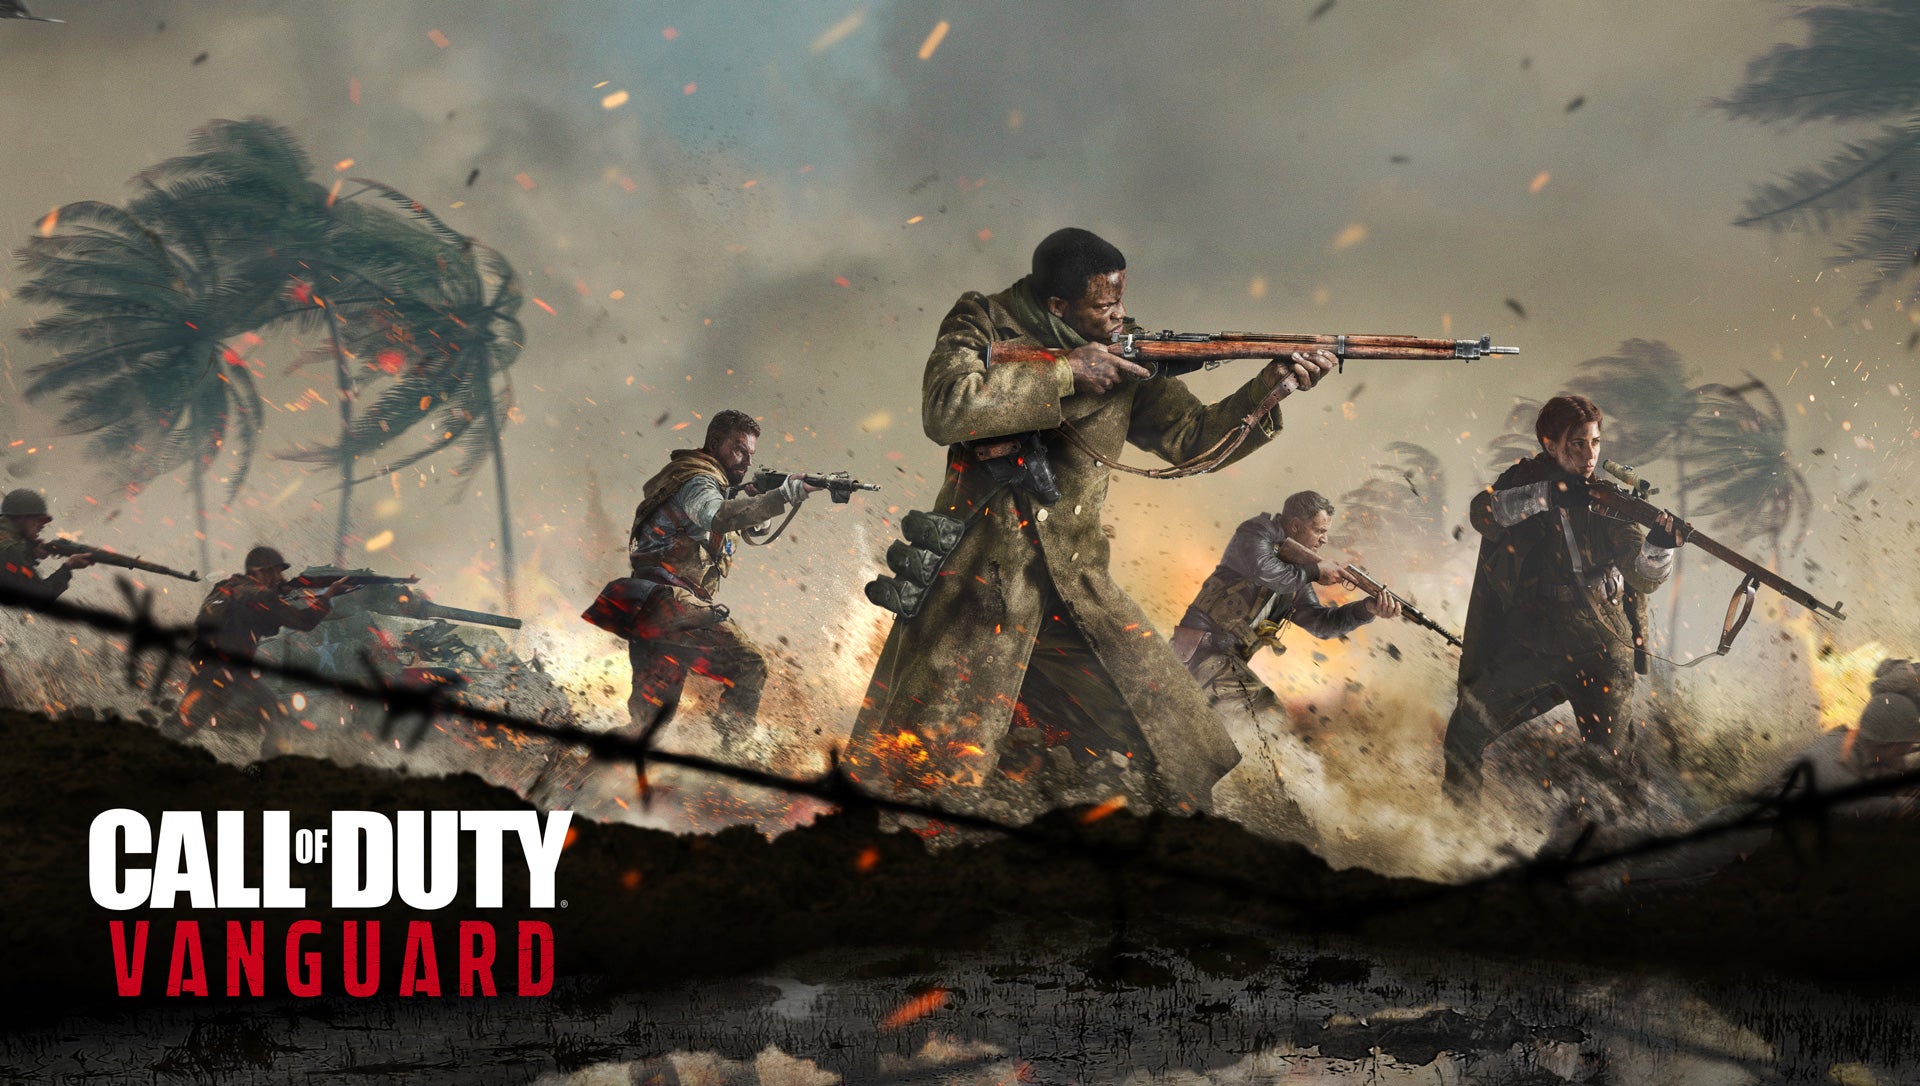 Image for Call of Duty: Vanguard to be revealed Thursday in Warzone